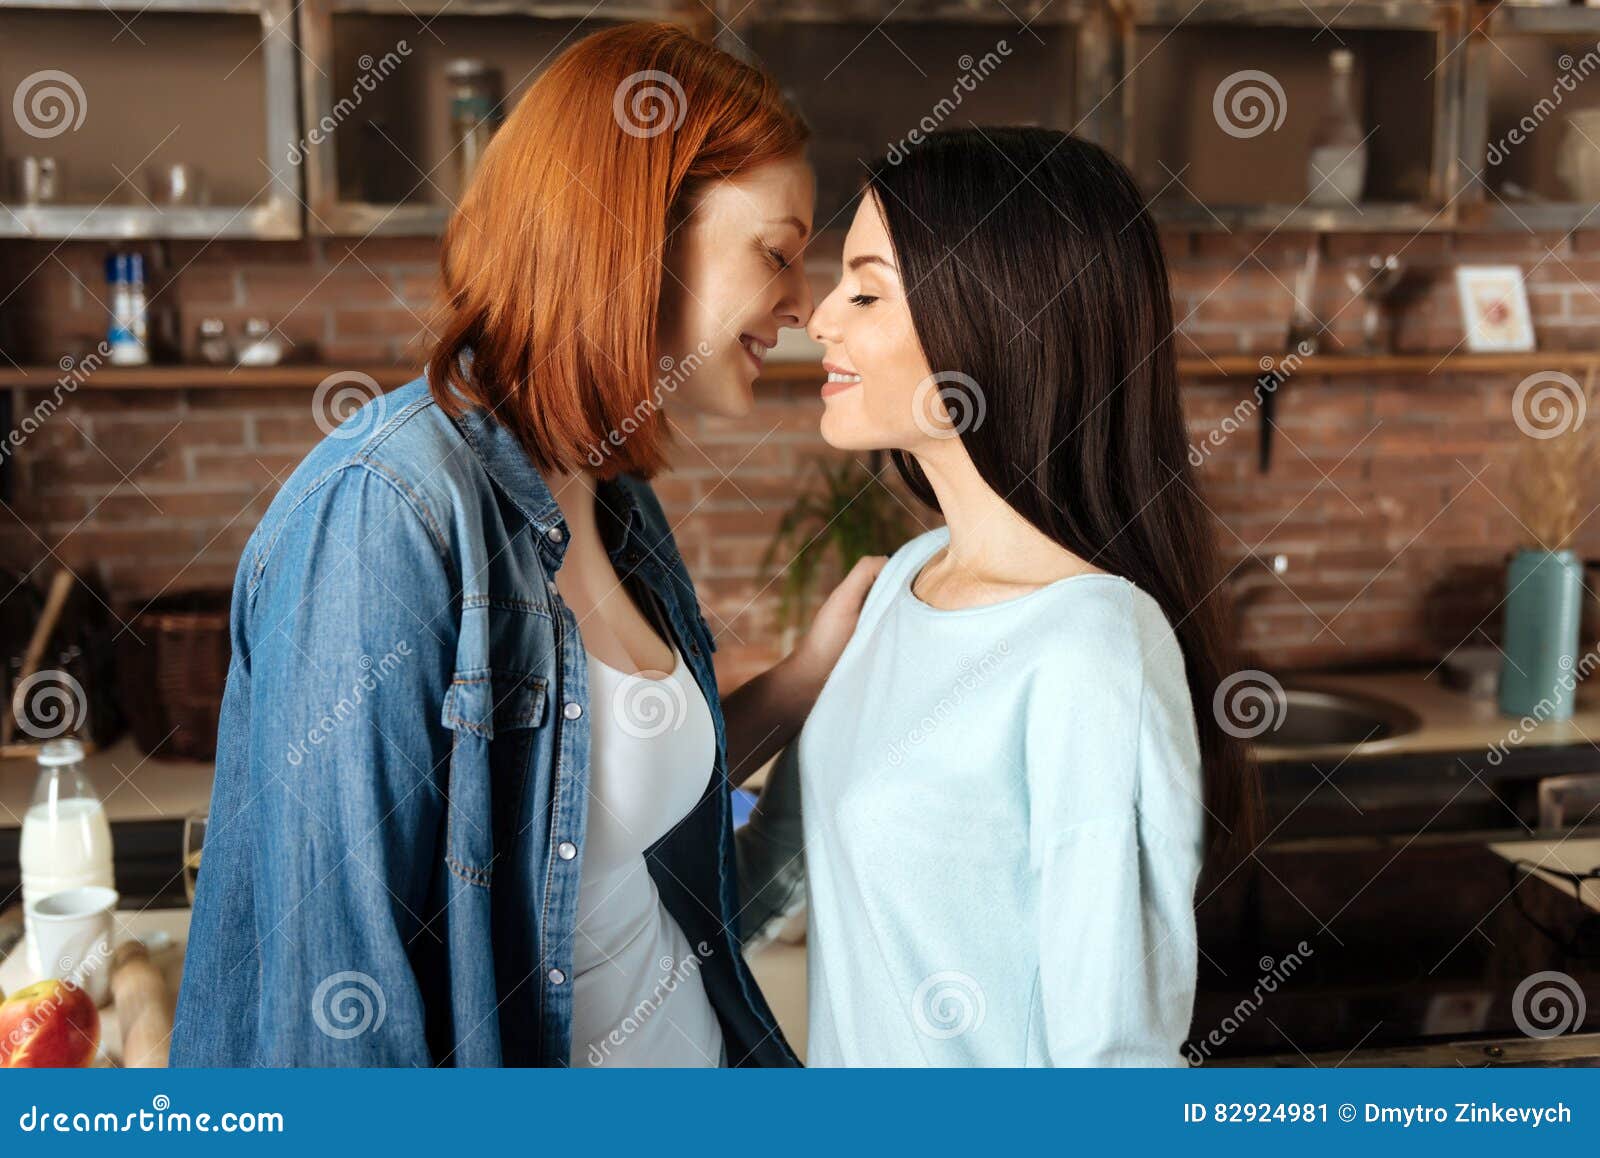 Lesbions Making Out